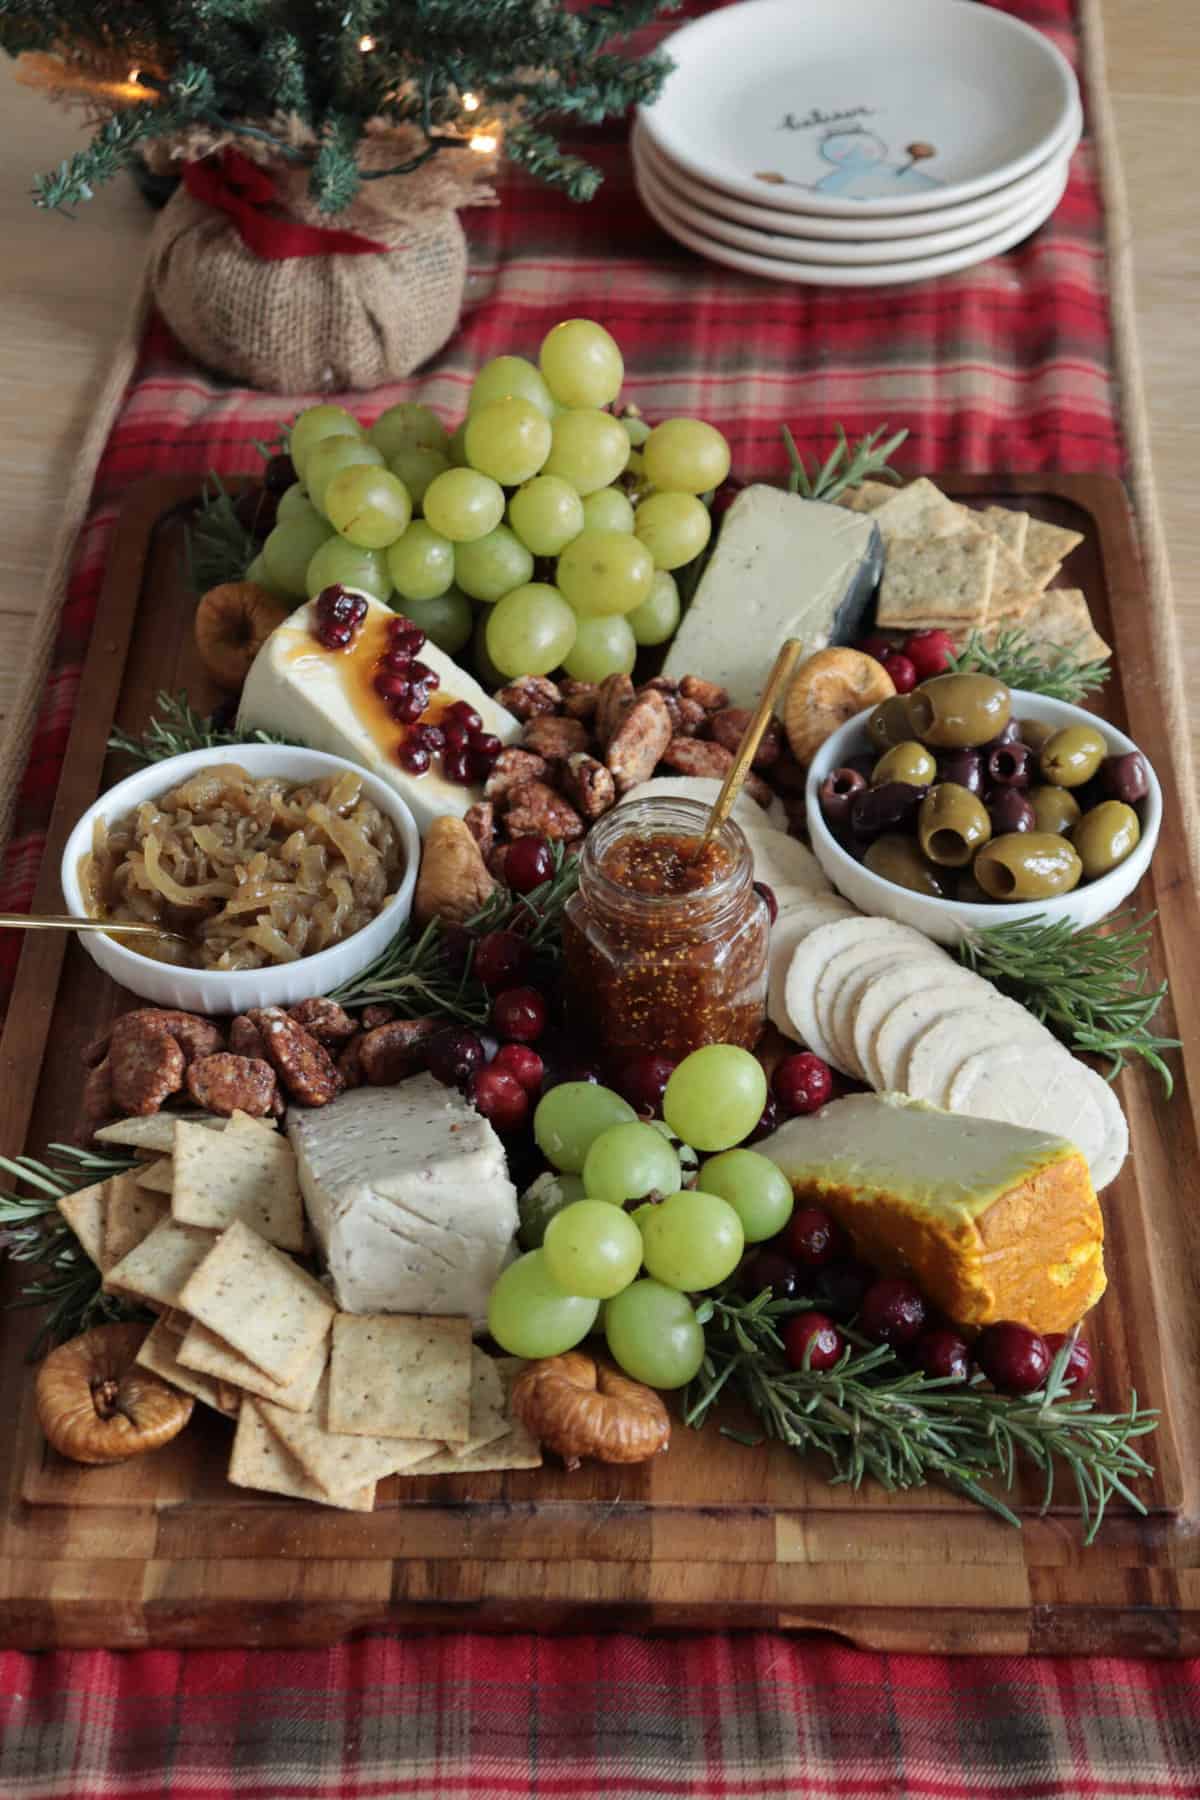 Cheese board with grapes, olives, herbs and crackers.